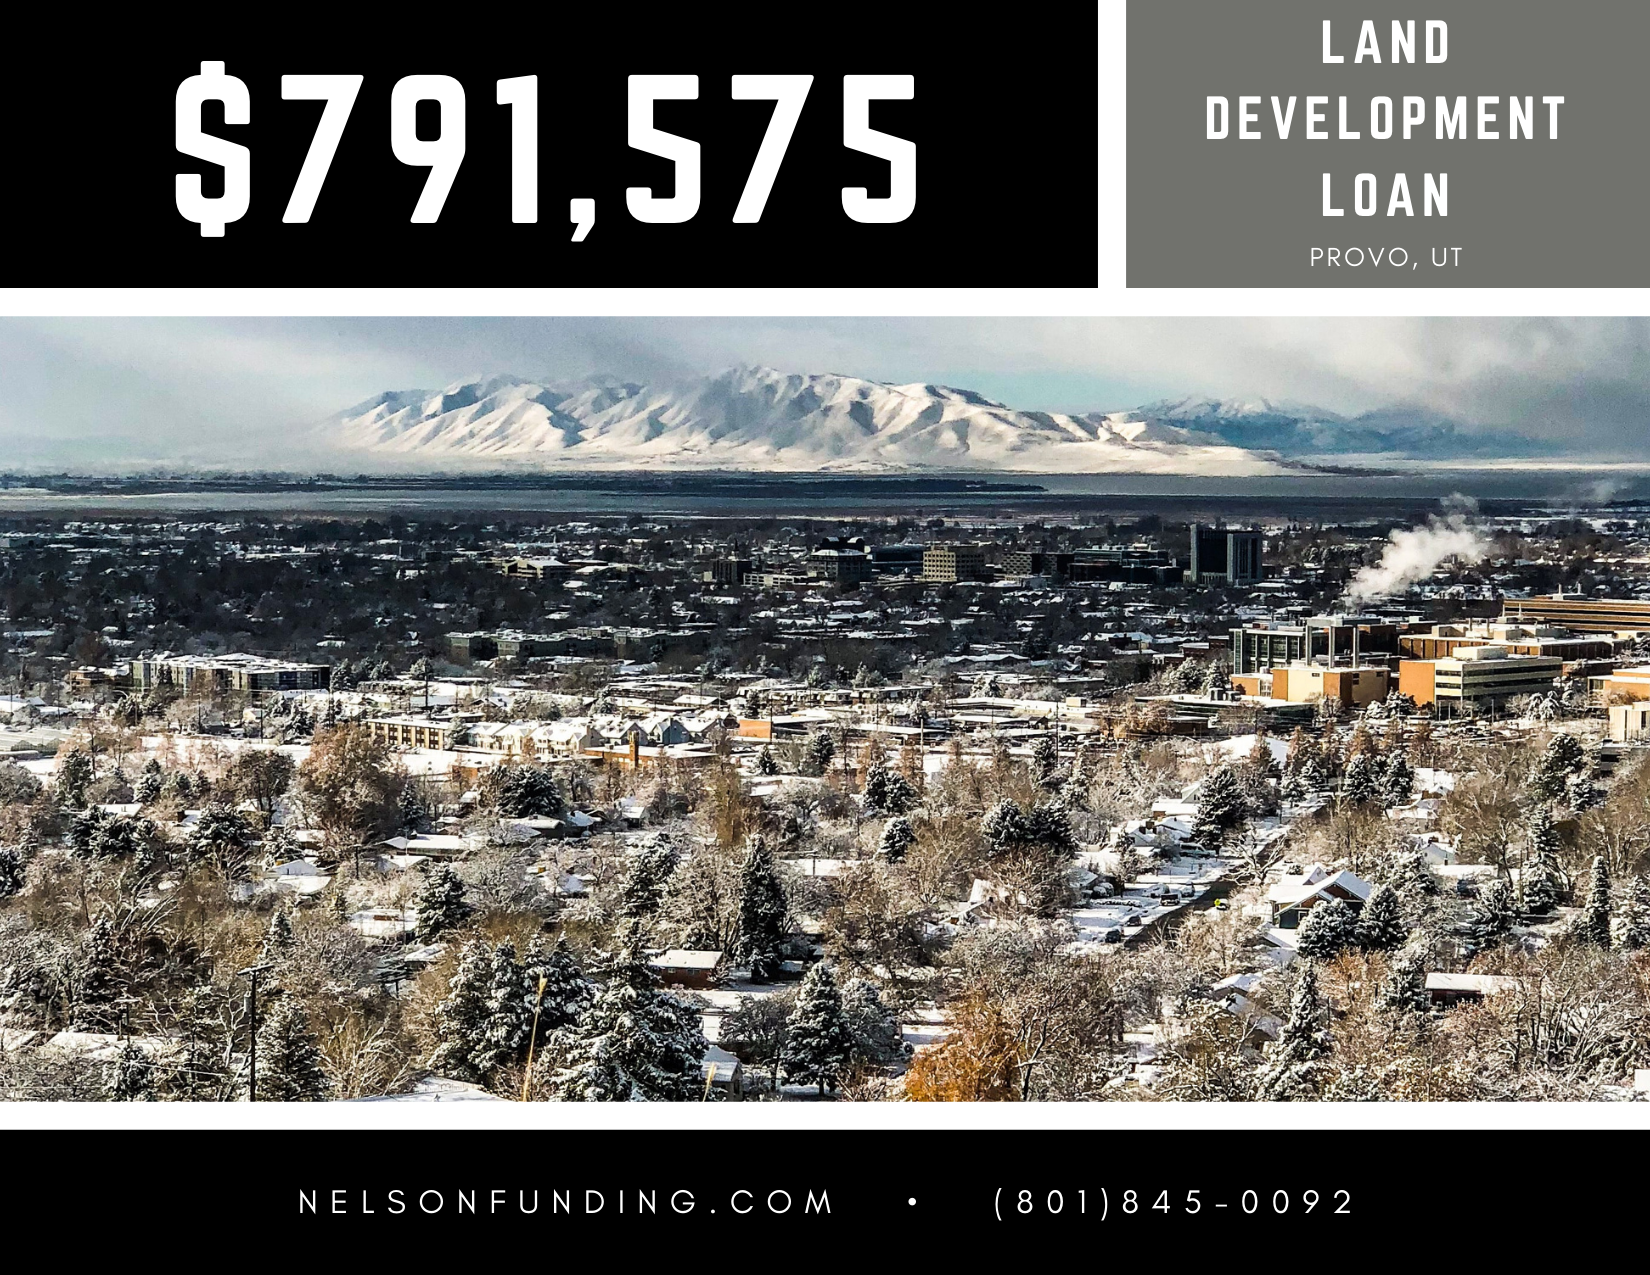 Provo Land Acquisition and Development Loan